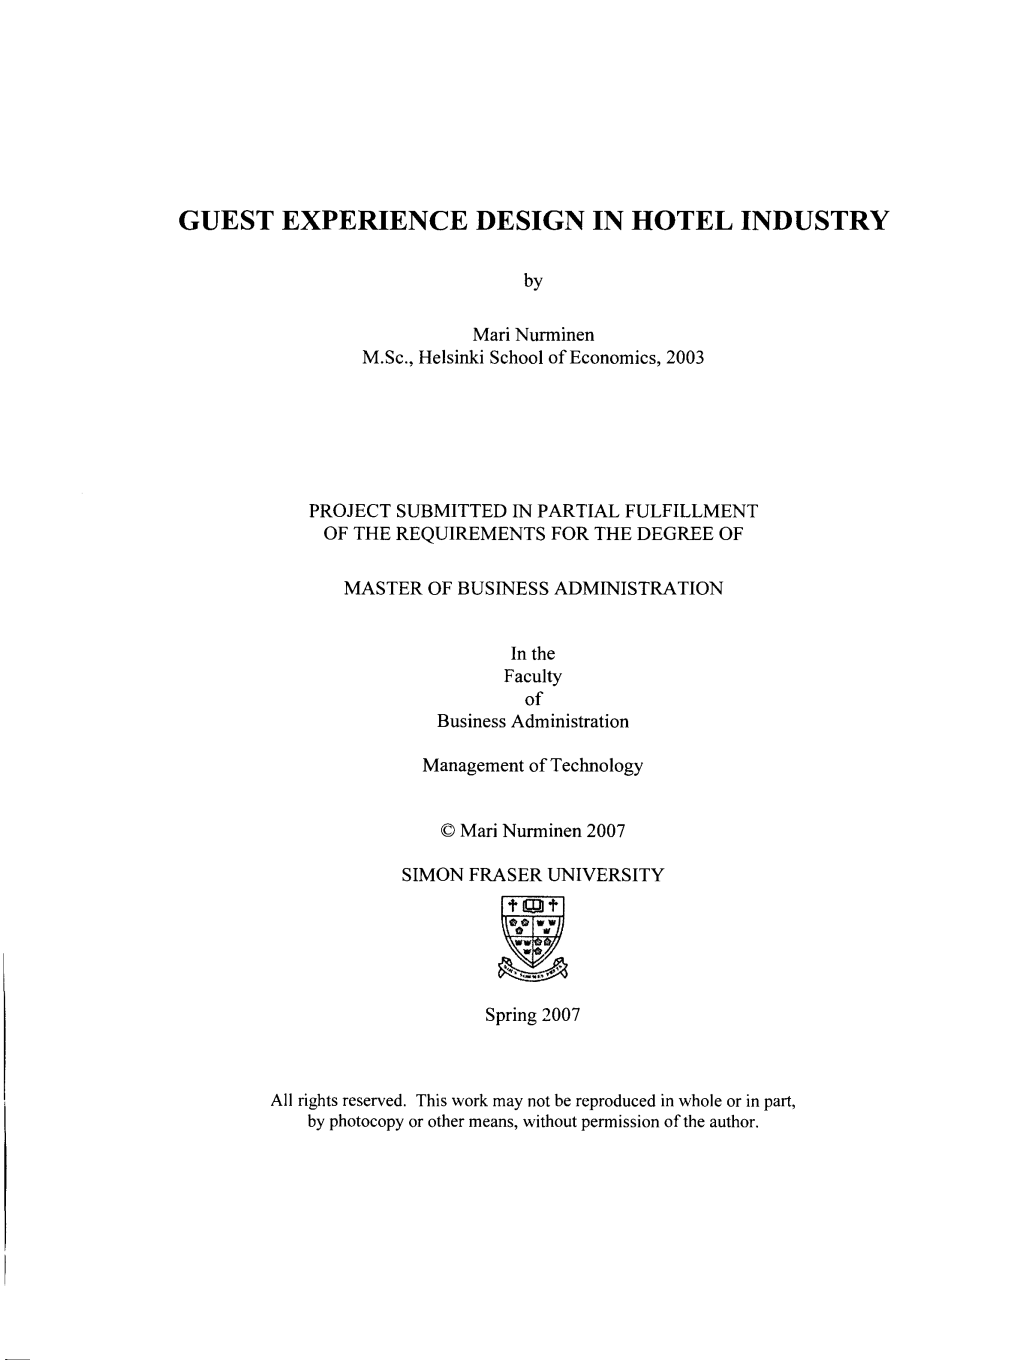 Guest Experience Design in Hotel Industry